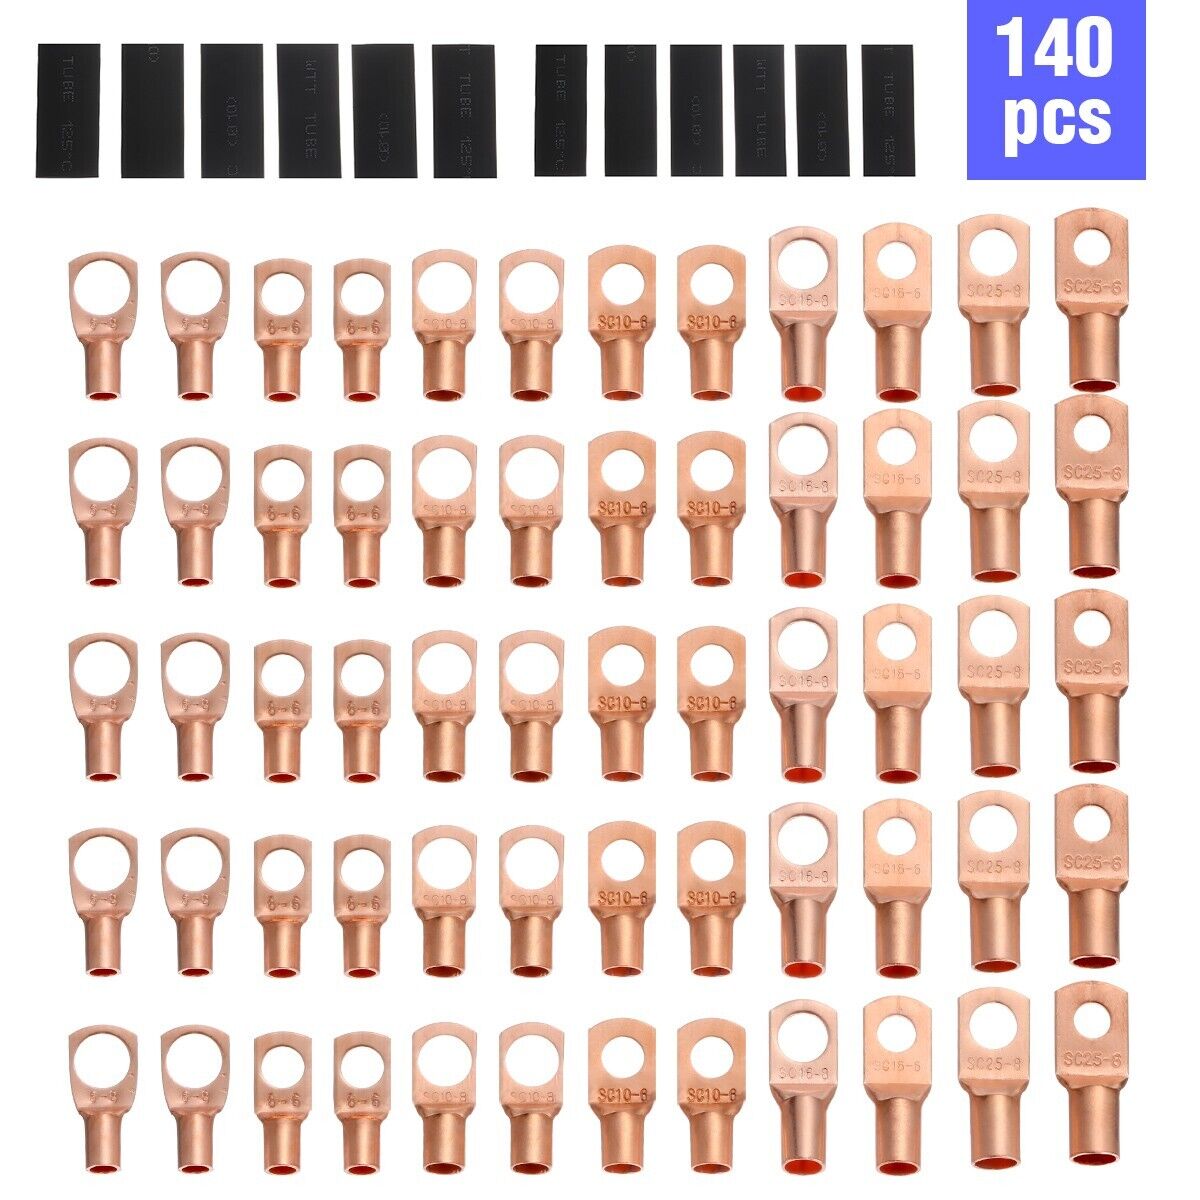 140pcs Copper Wire Lugs Battery Cable Ends Terminal Connectors Assortment Kit US Unbranded Does not apply